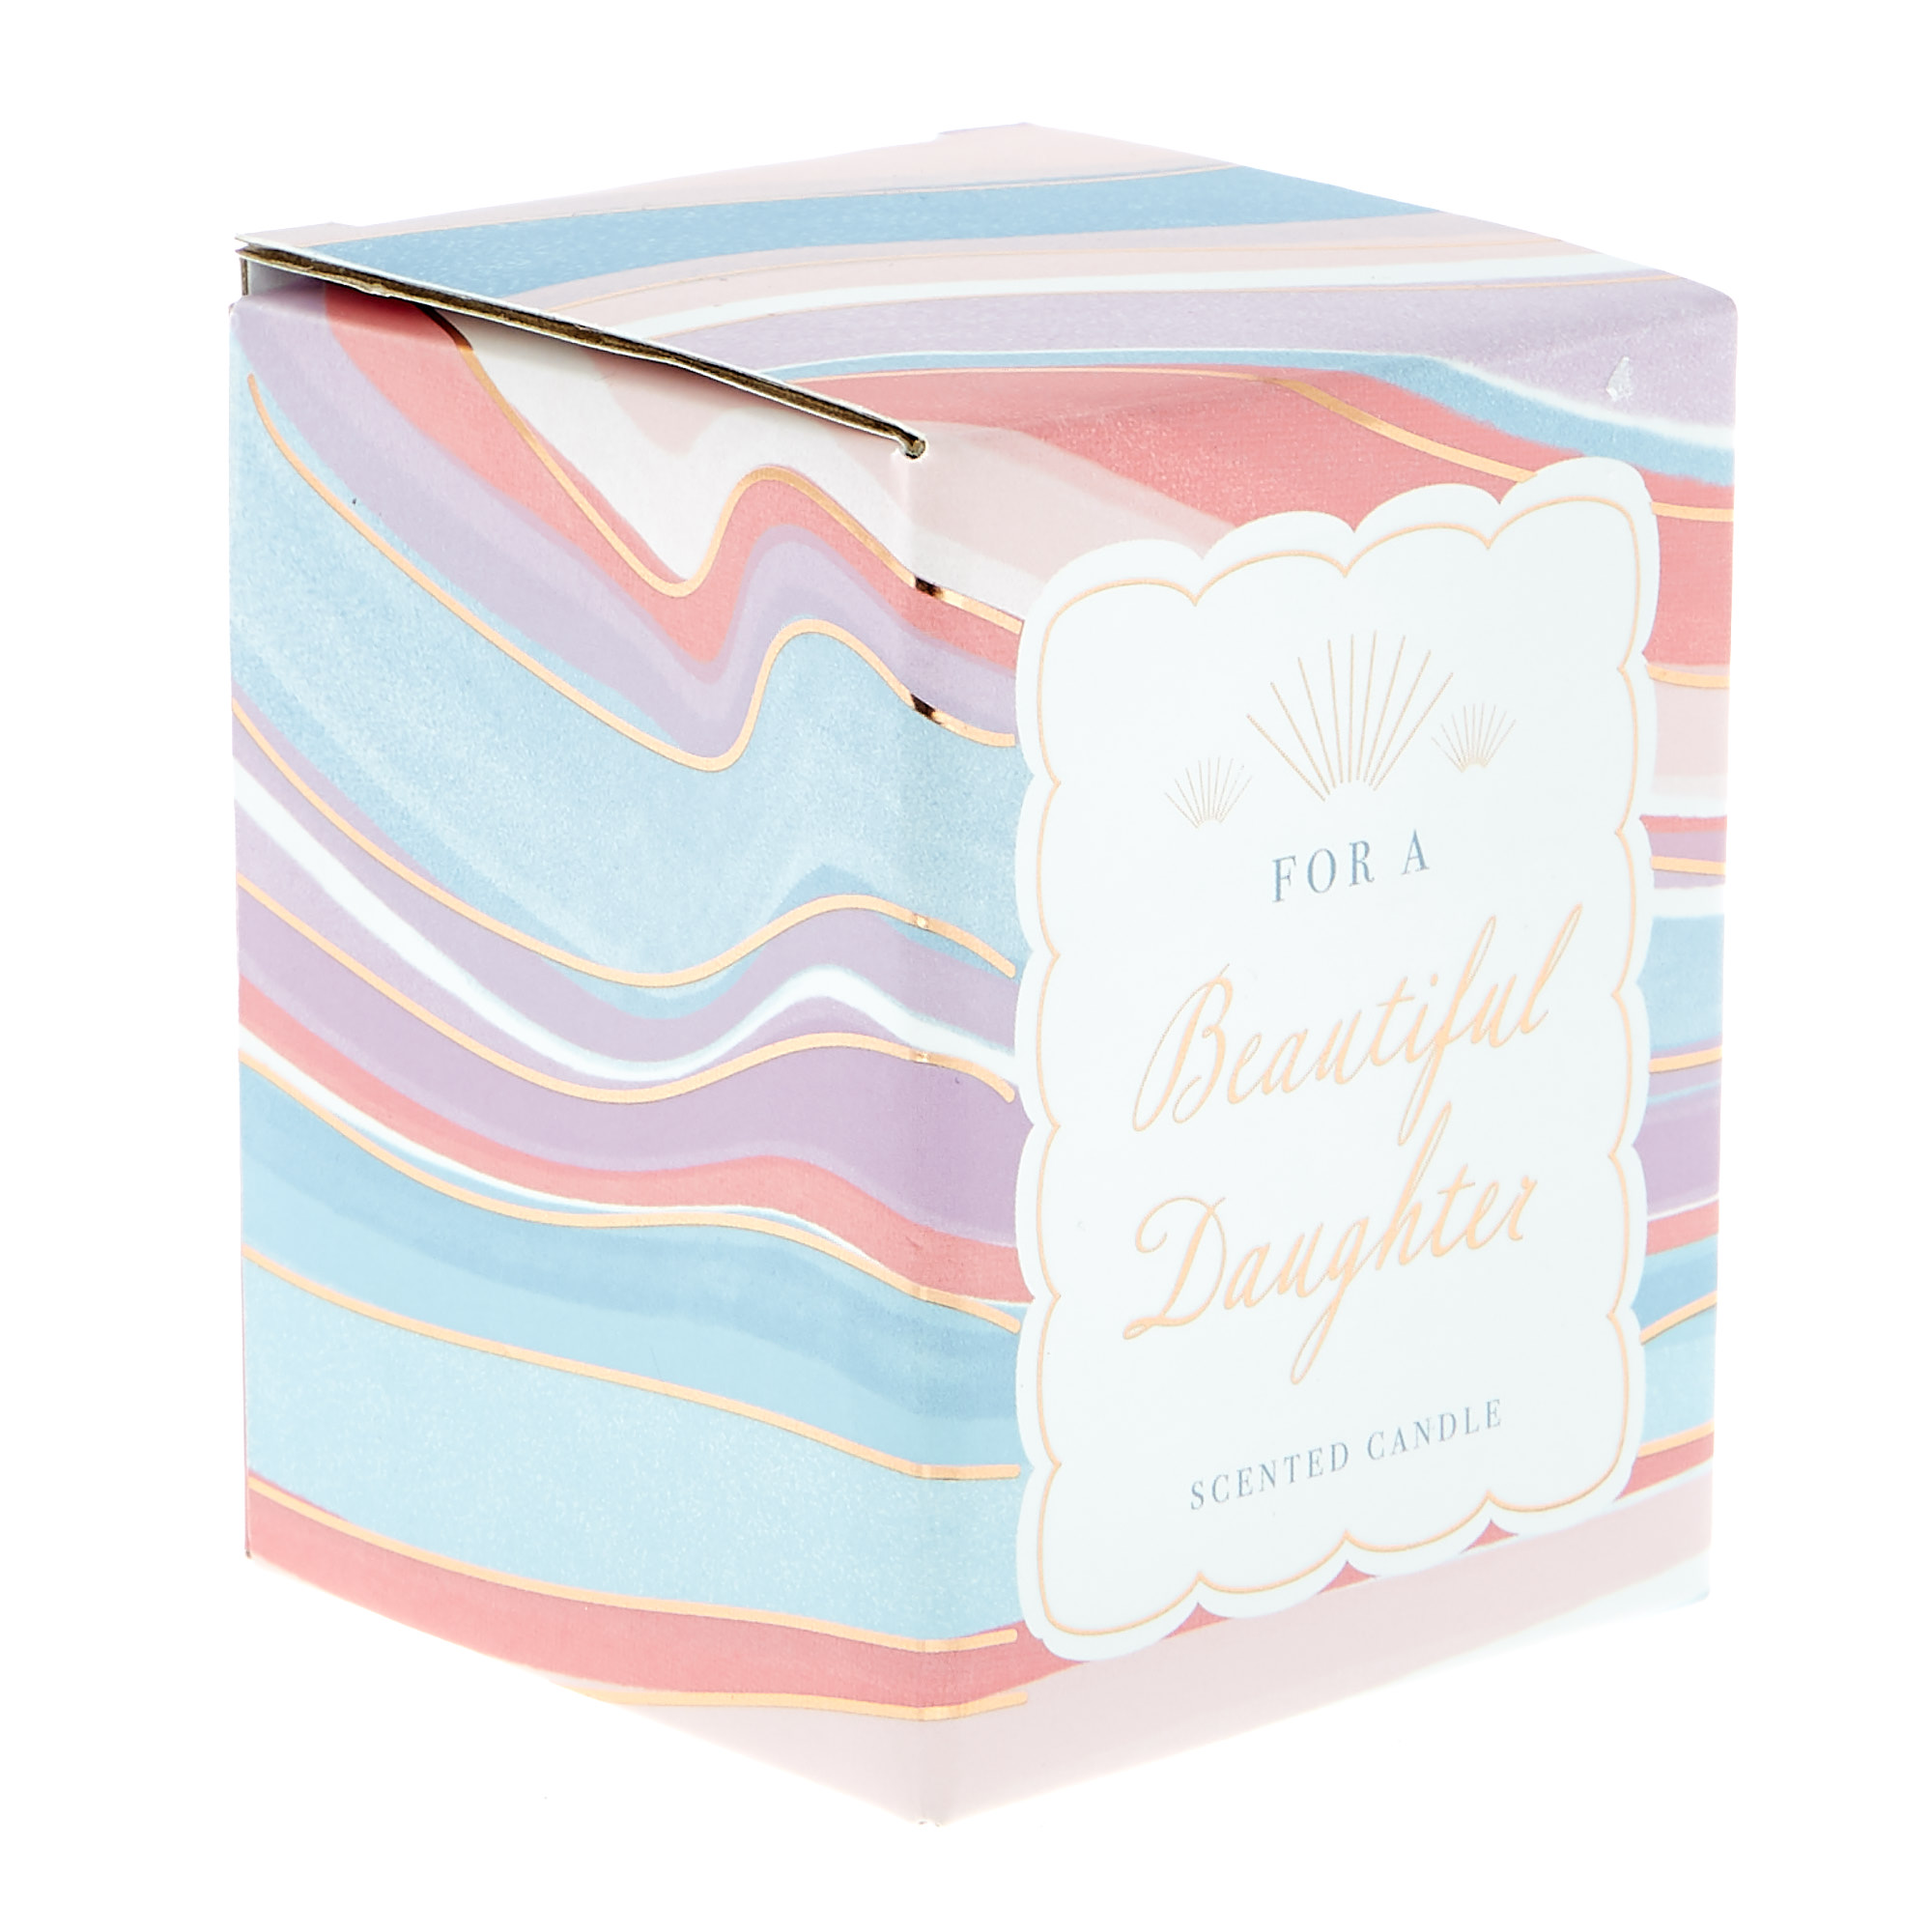 Beautiful Daughter Vanilla Scented Candle